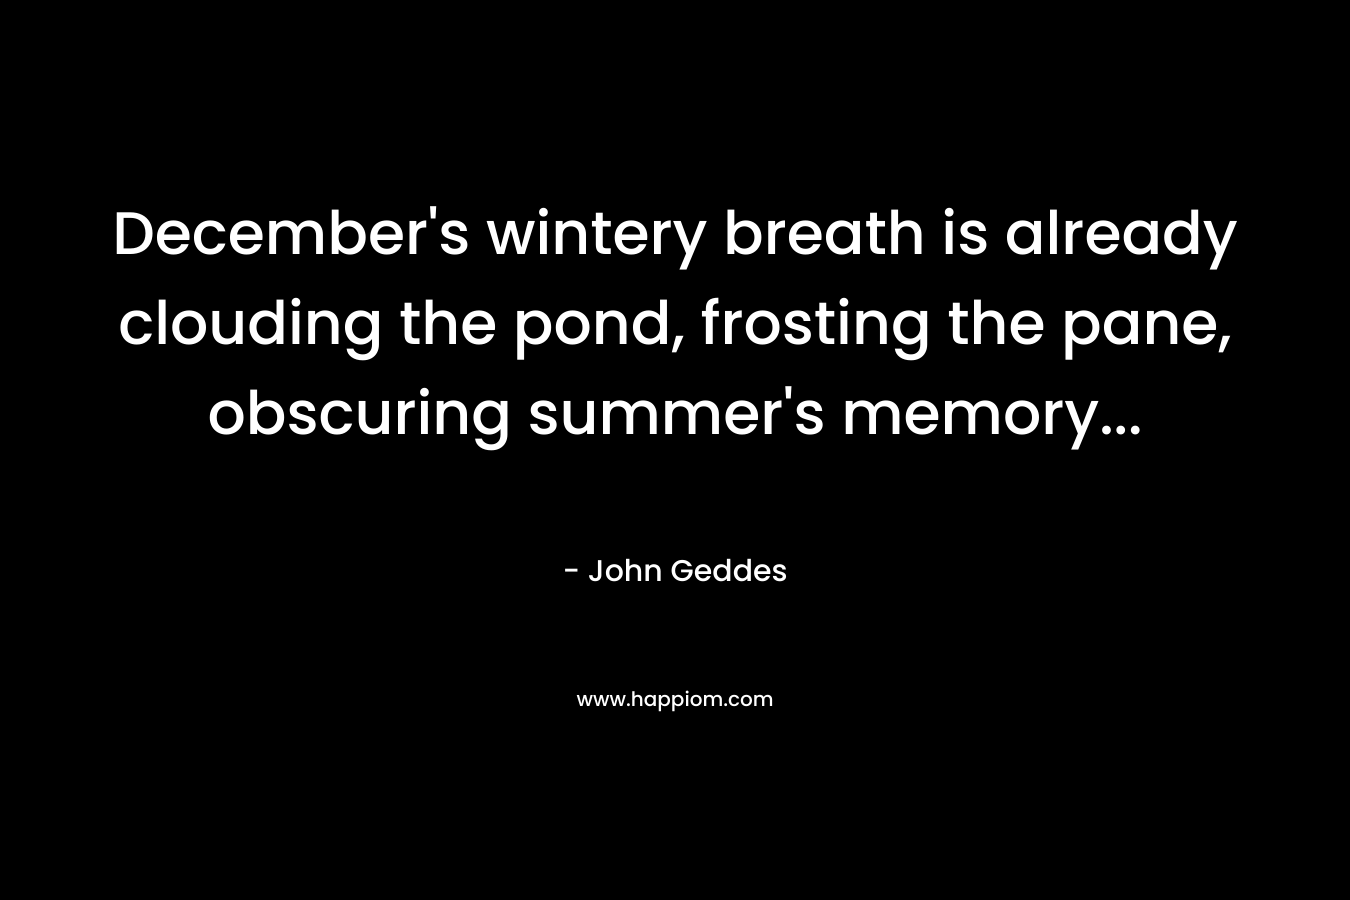 December’s wintery breath is already clouding the pond, frosting the pane, obscuring summer’s memory… – John Geddes